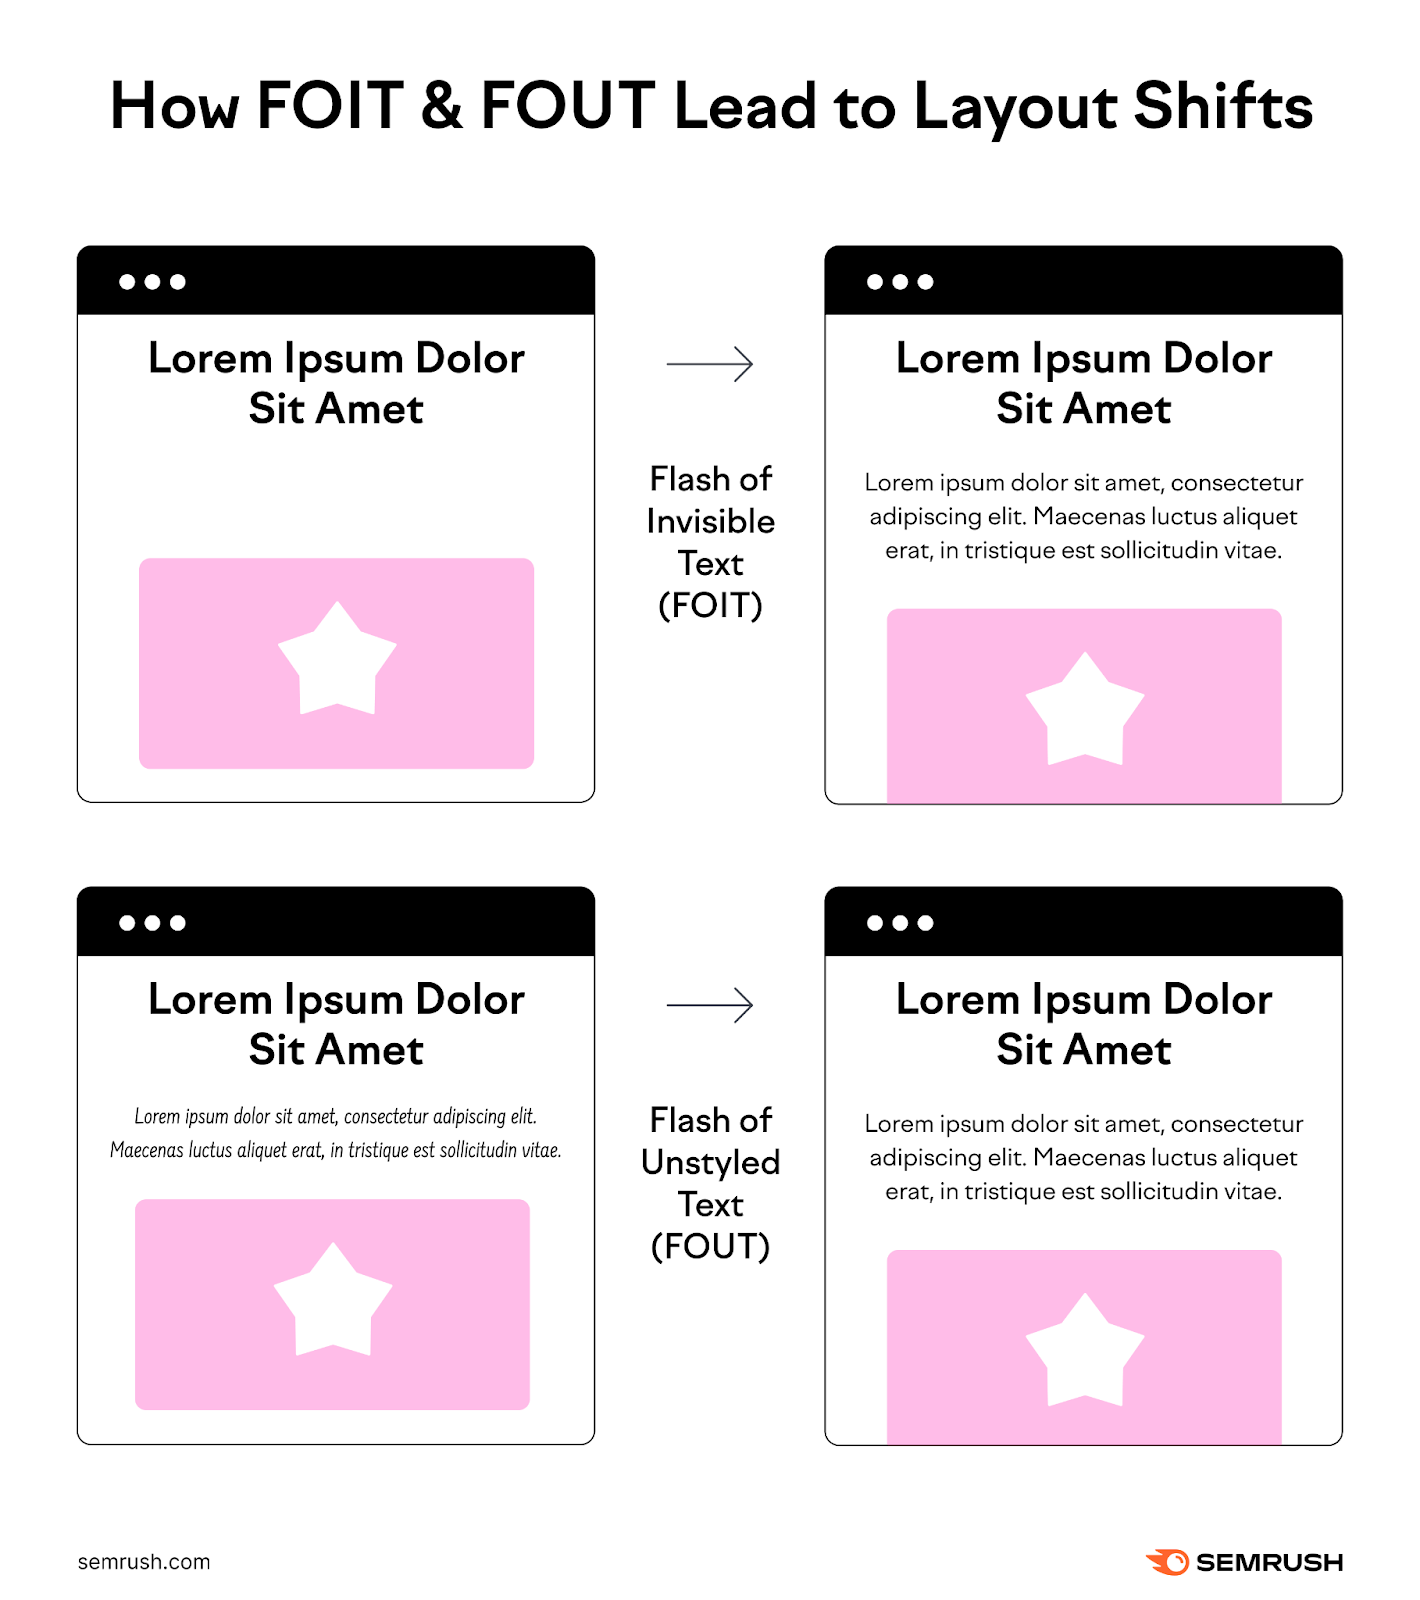 Top illustration showing how flash of invisible text leads to an unexpected layout shift, with the bottom illustration showing how a flash of unstyled text can lead to an unexpected layout shift.